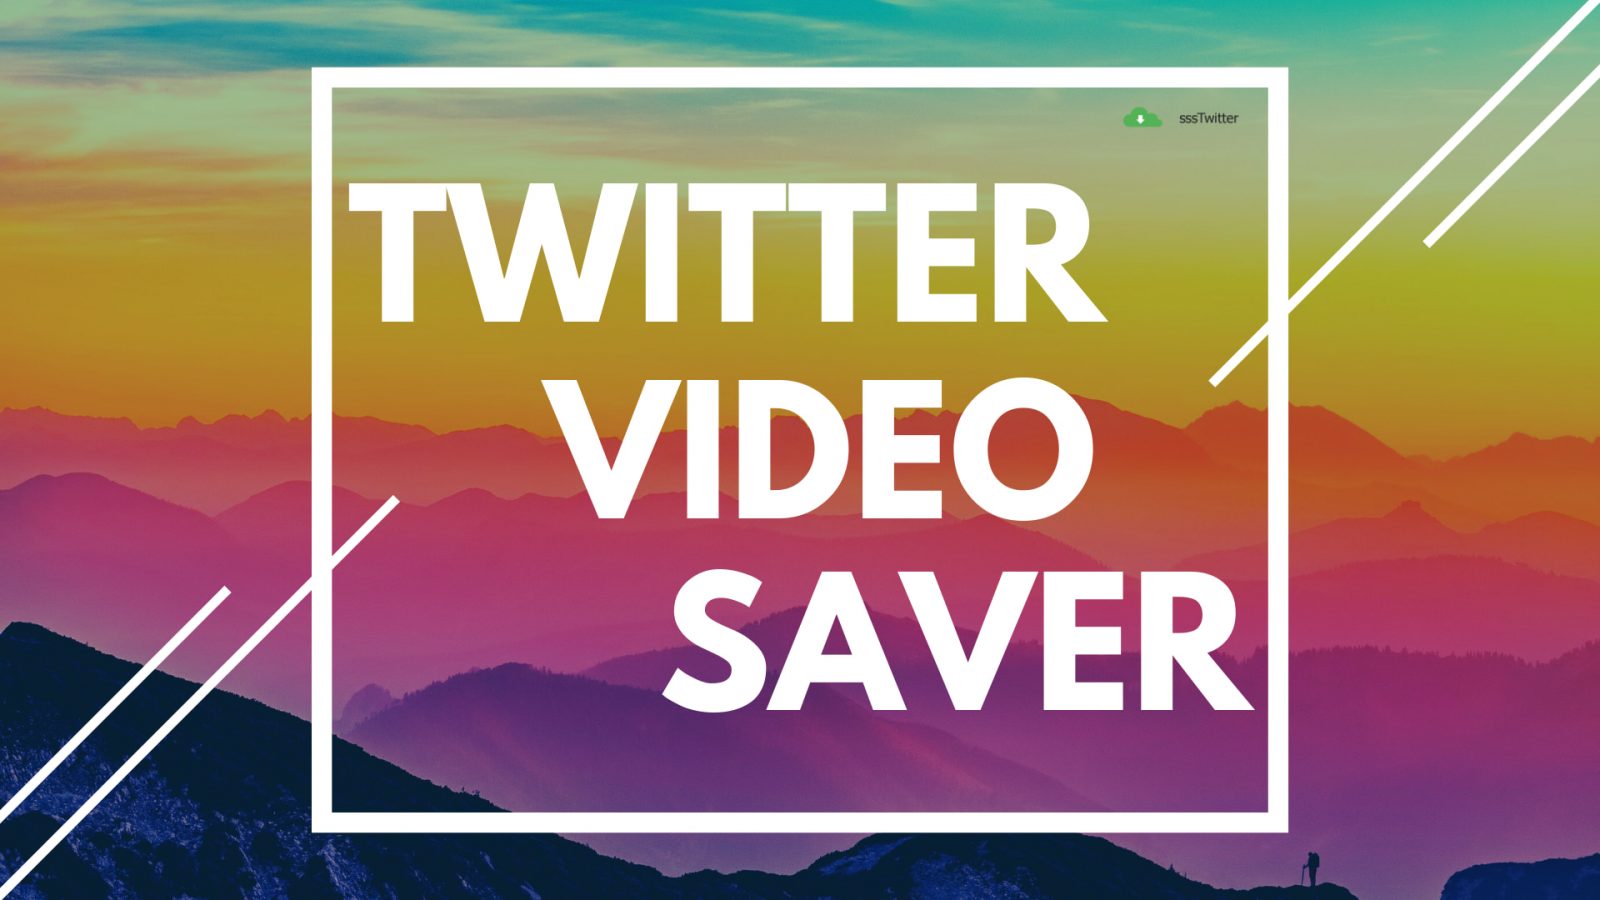 Easy Way to Download Video from Twitter